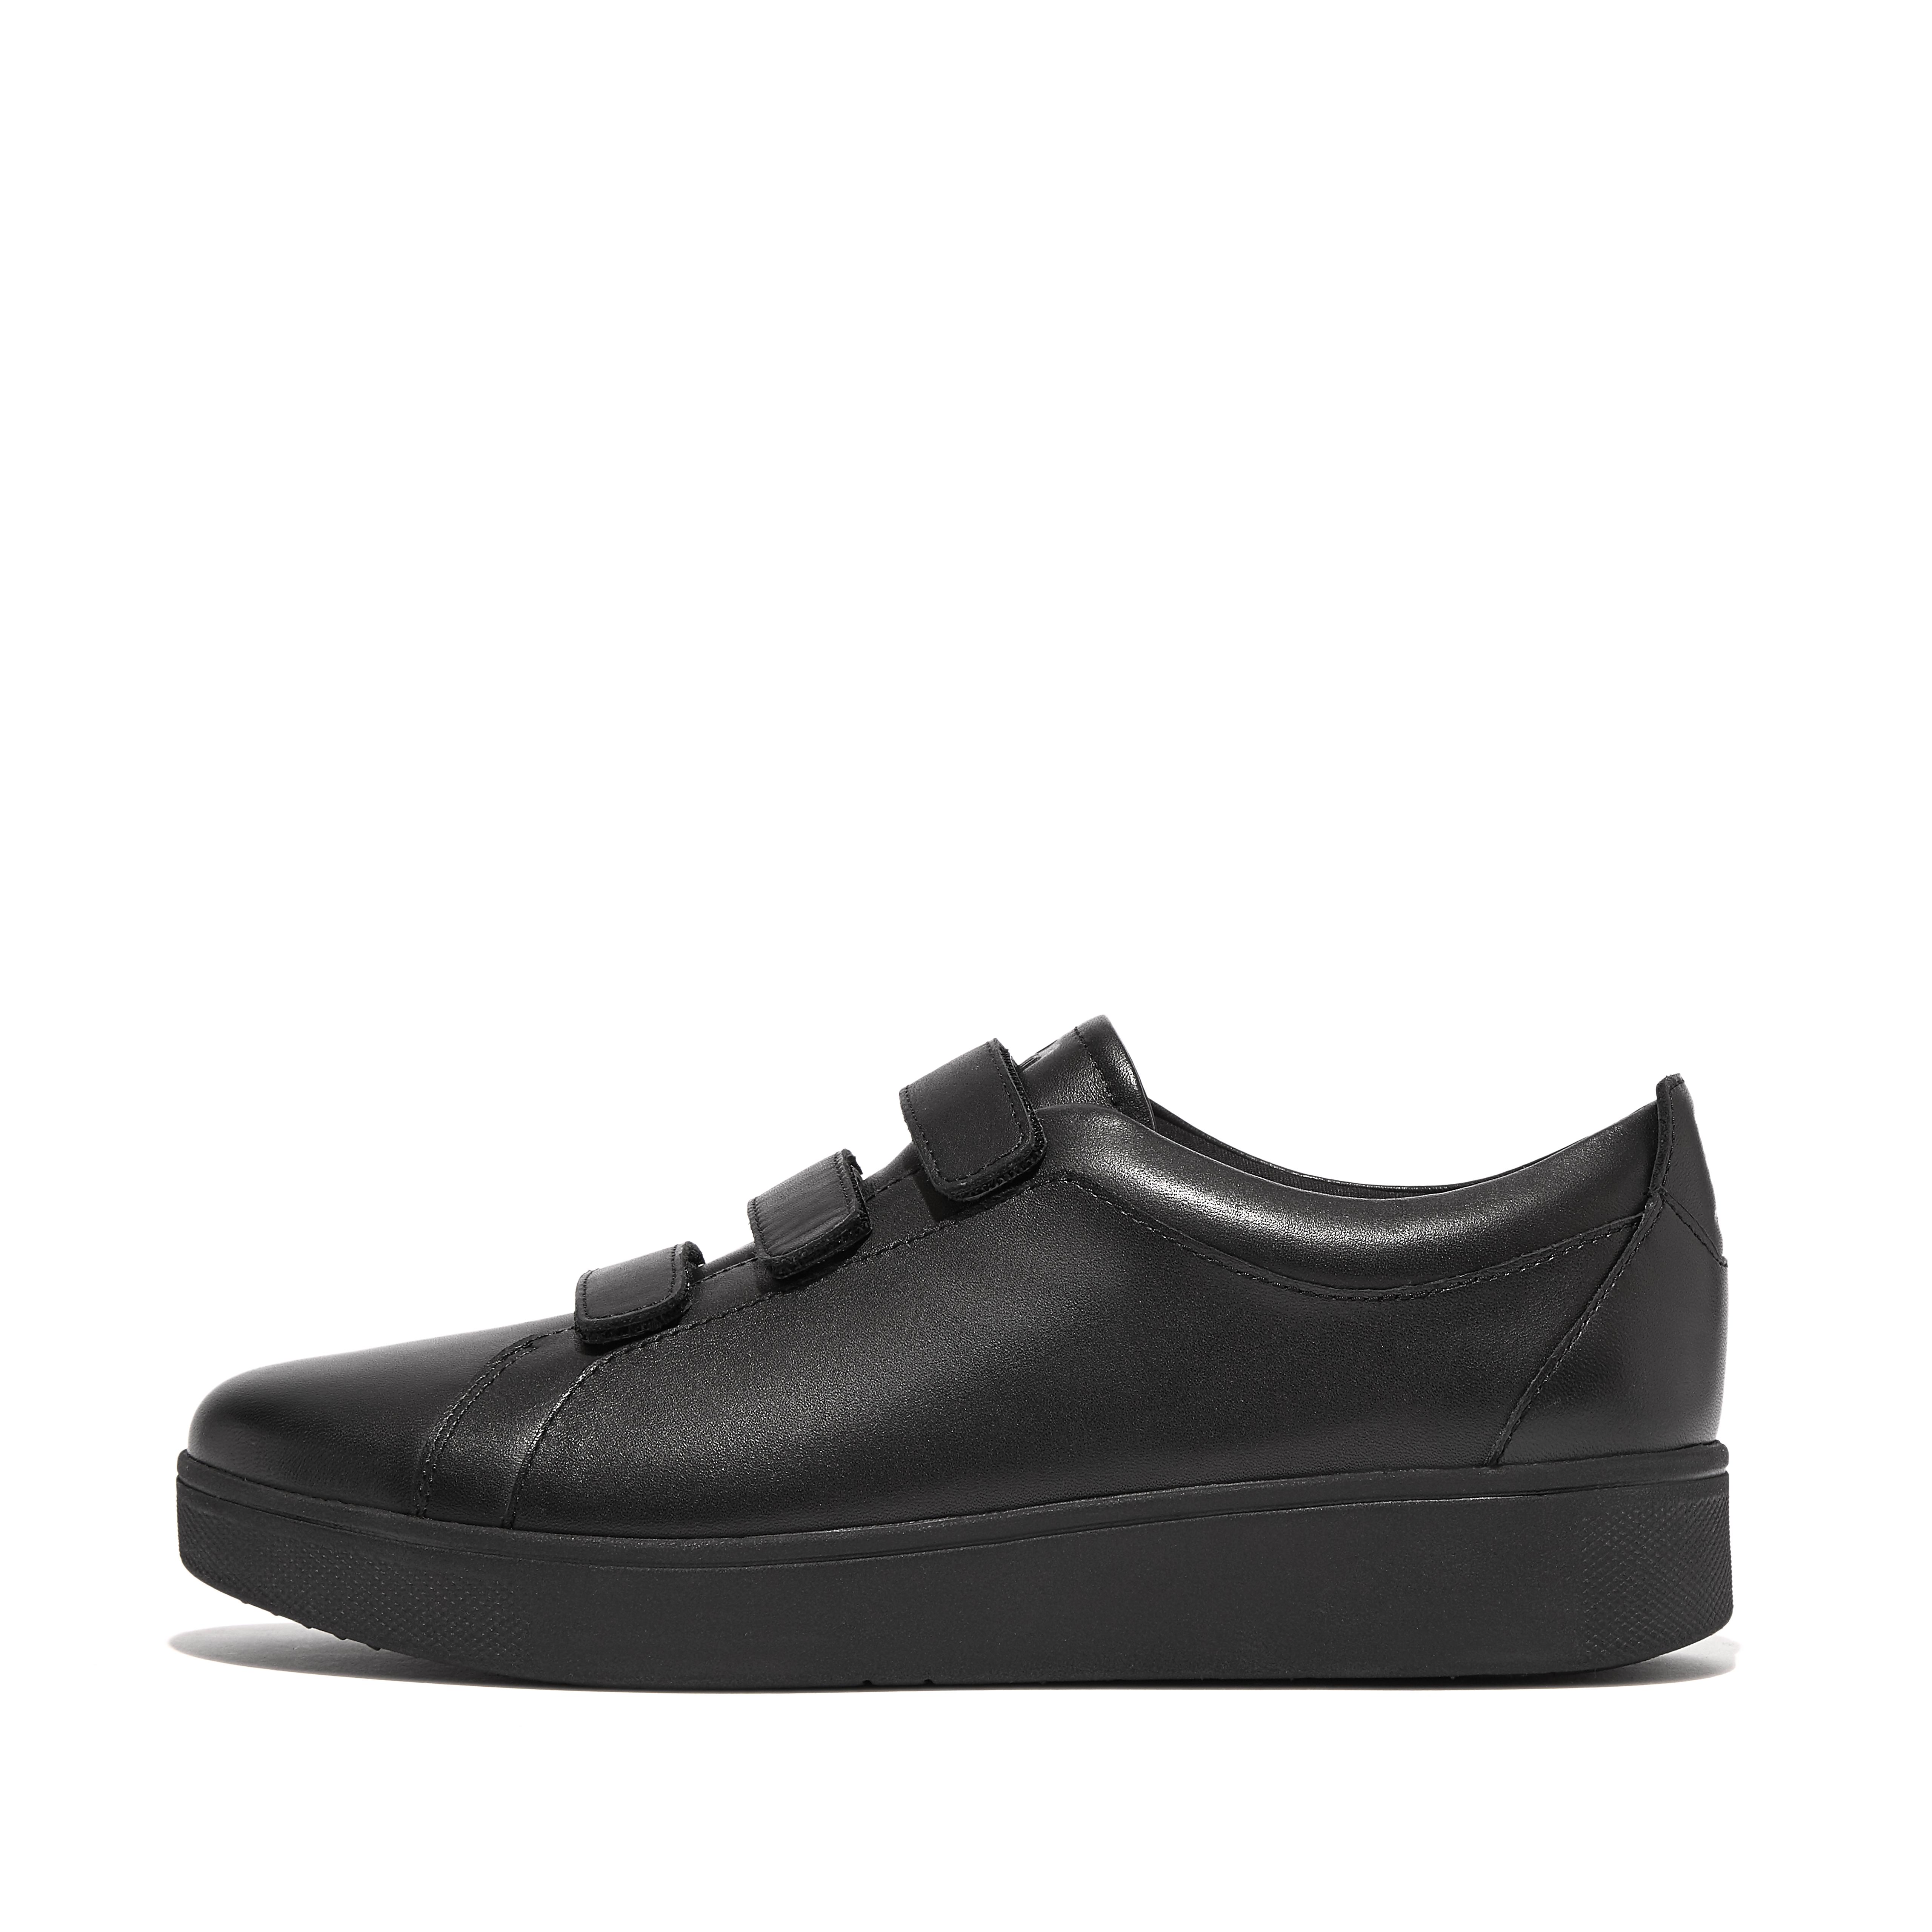 Fitflop Leather Strap Sneakers,All Black